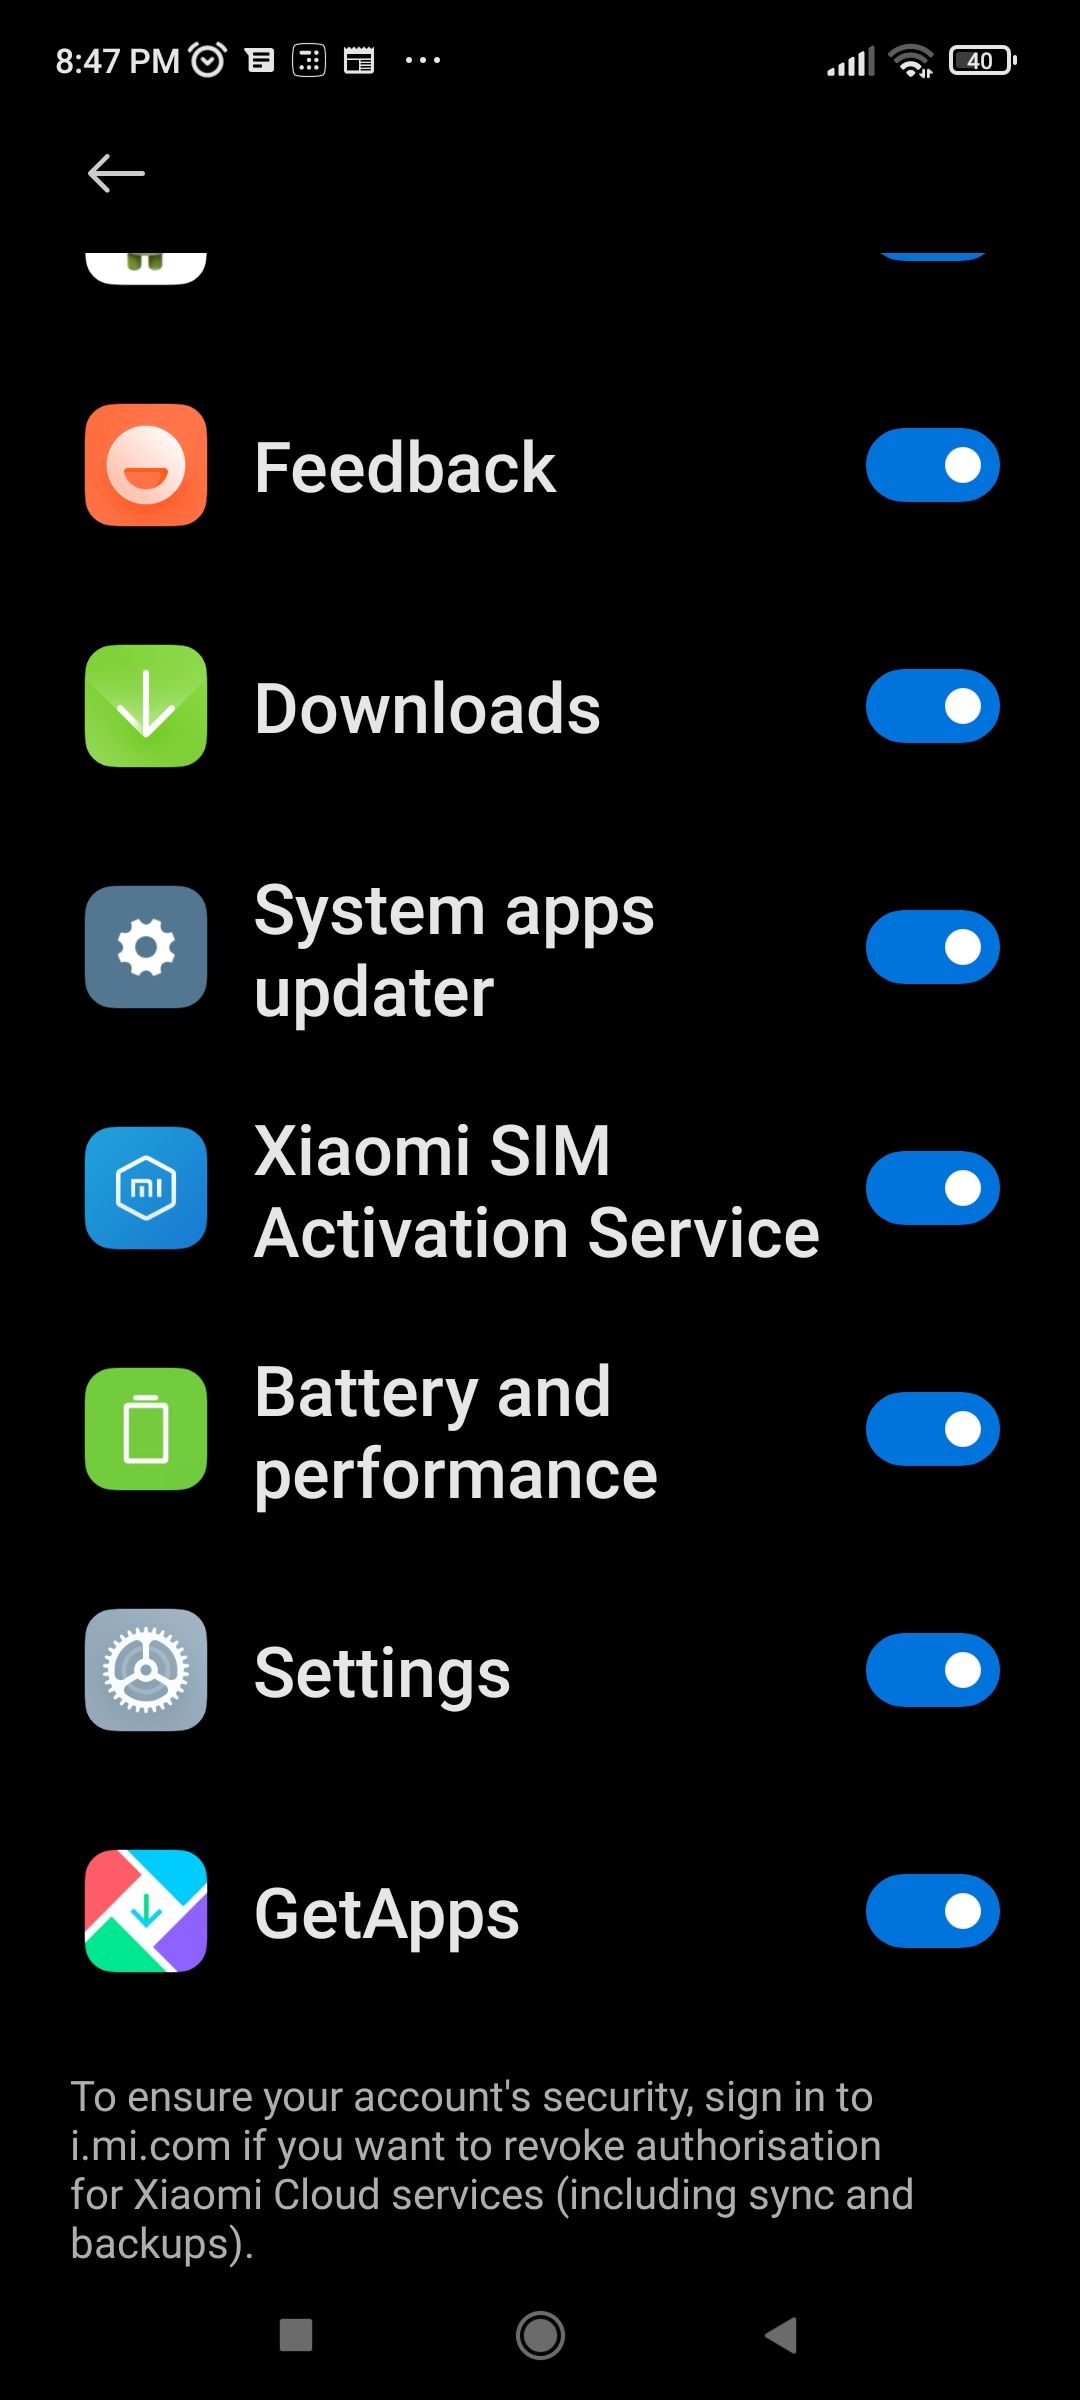 Turning GetApps off in Xiaomi Settings